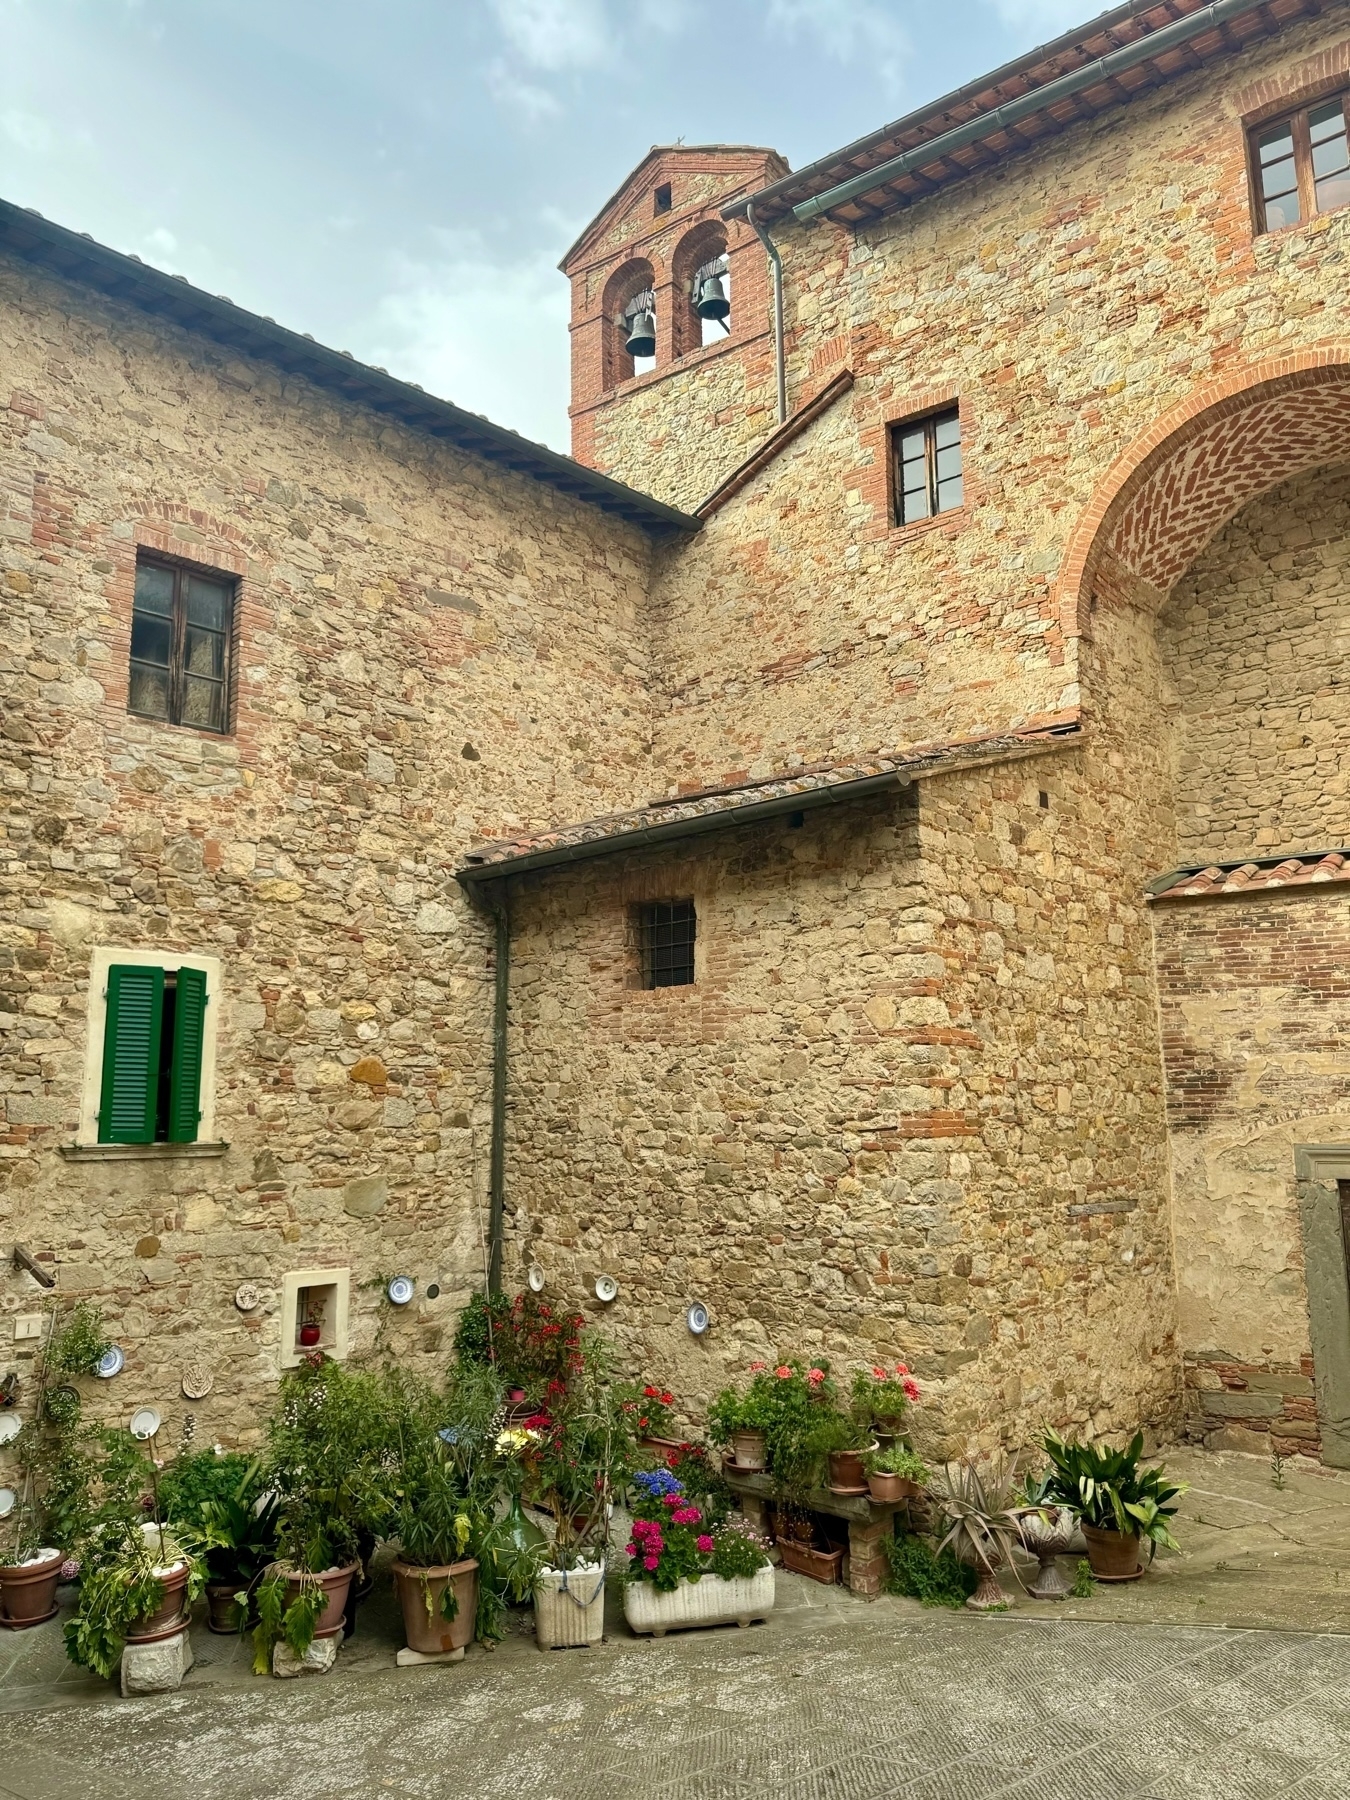 A rustic stone courtyard with potted plants and vibrant flowers arranged against the walls. Decorative plates are mounted on the walls. Above, a bell tower with two bells is visible, and the weathering on the stone walls suggests the structure is historic. 